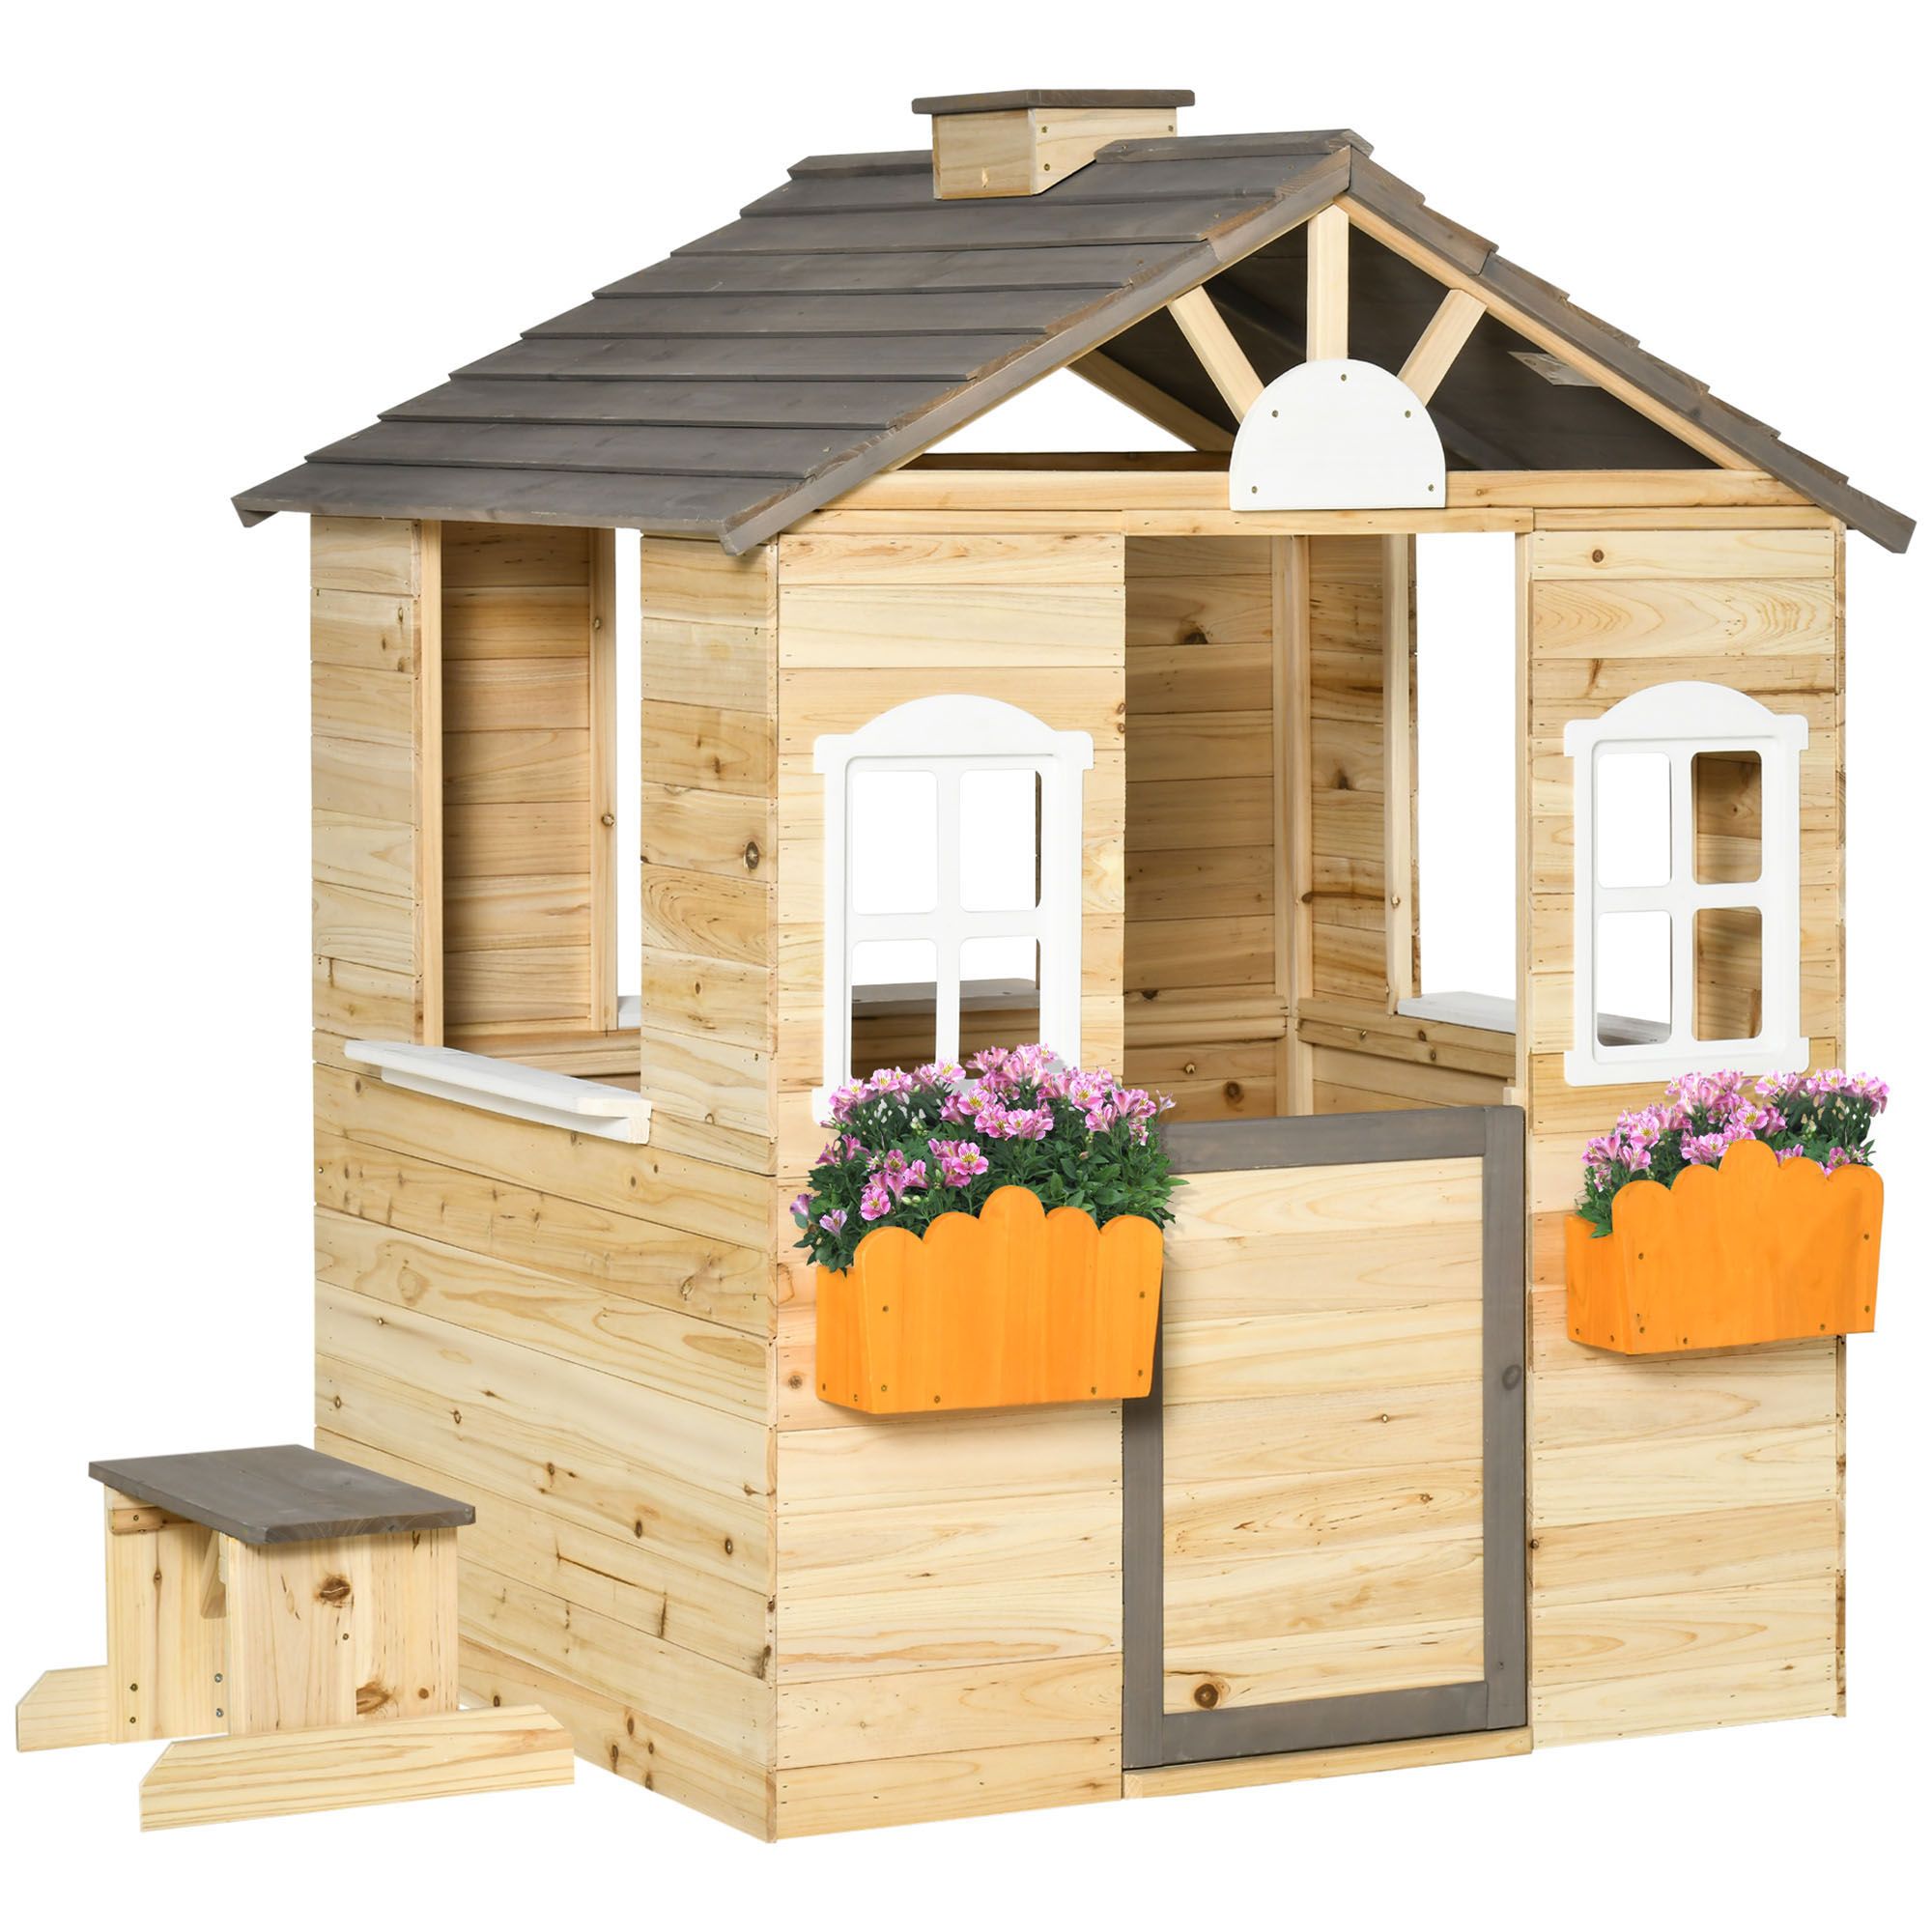 Outsunny Wooden Kids Playhouse, Outdoor Garden Games Cottage With Working Door, Windows, Bench, Service Station, Flowers Pot Holder For 3-7 Years Old